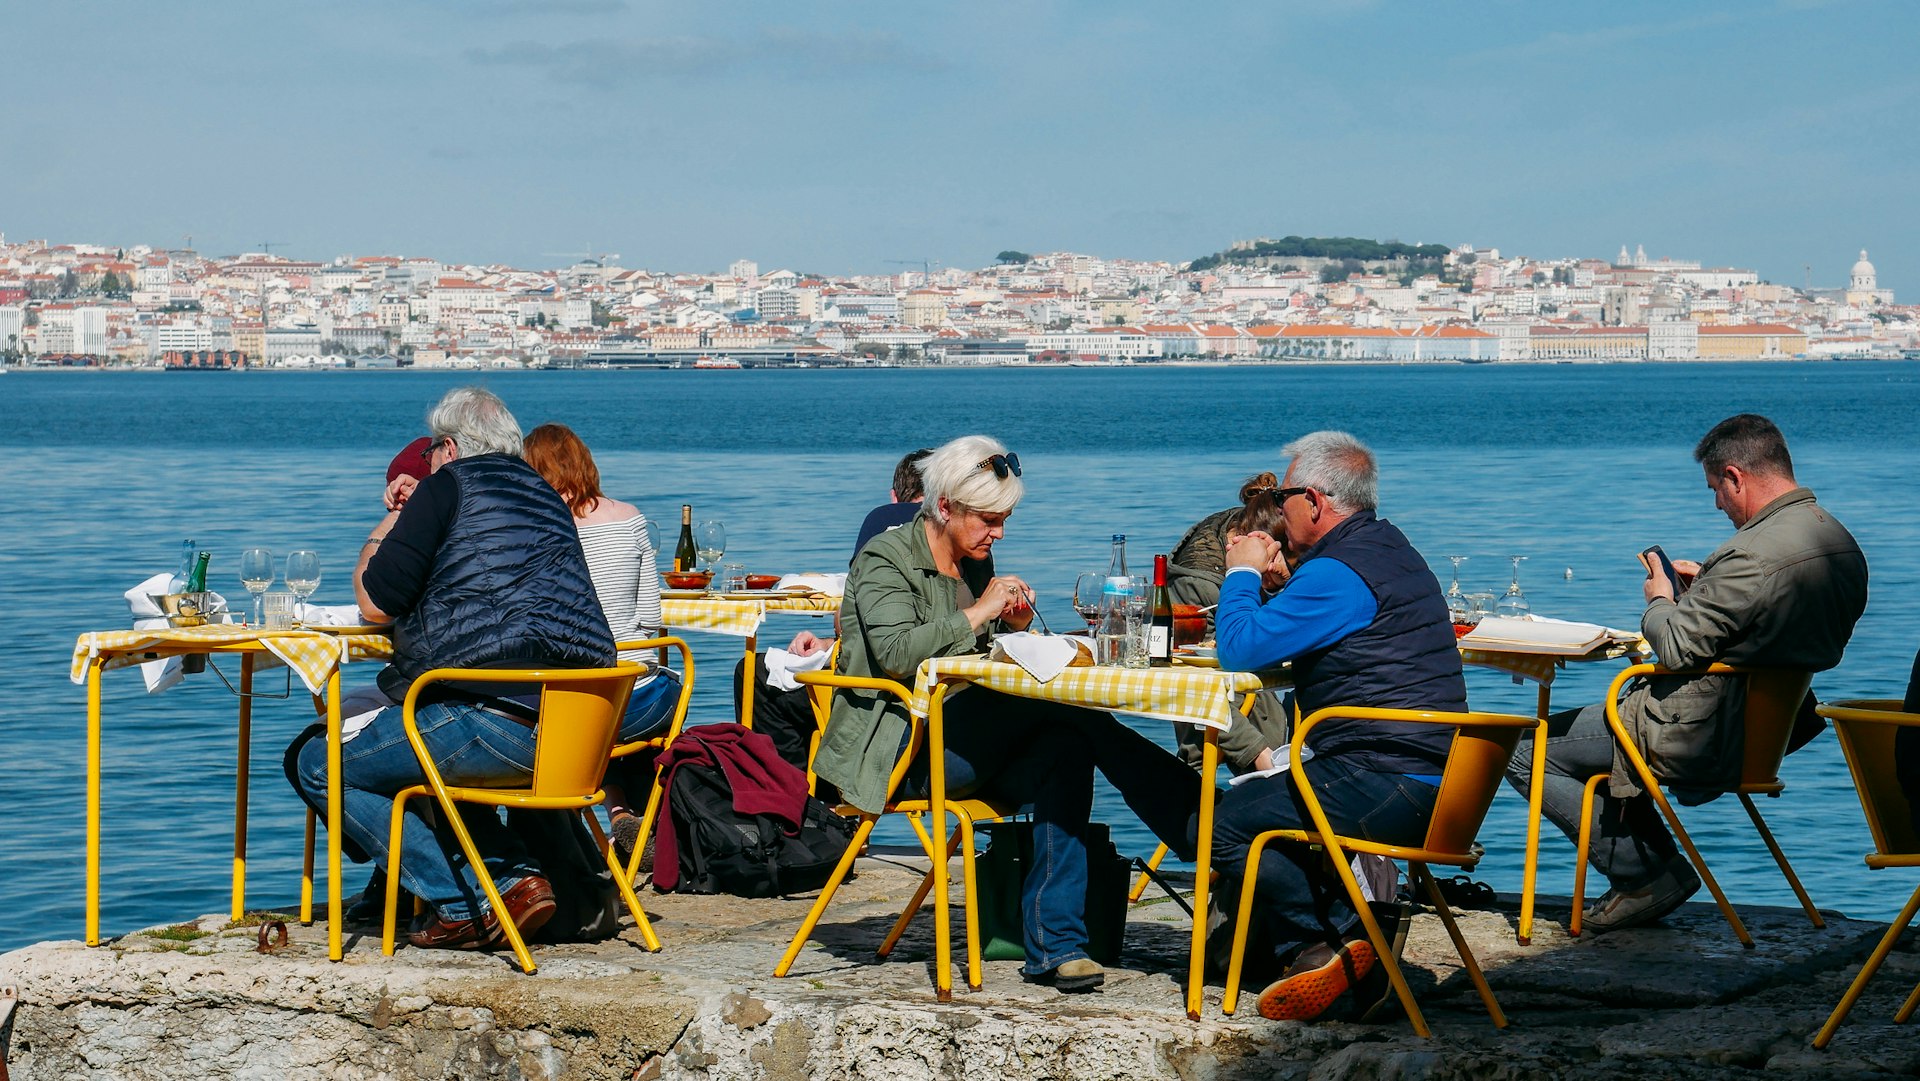  People sitting at yellow restaurant tables in the shore of the river Tagus in Cacilhas - Lisbon's cityscape in the background